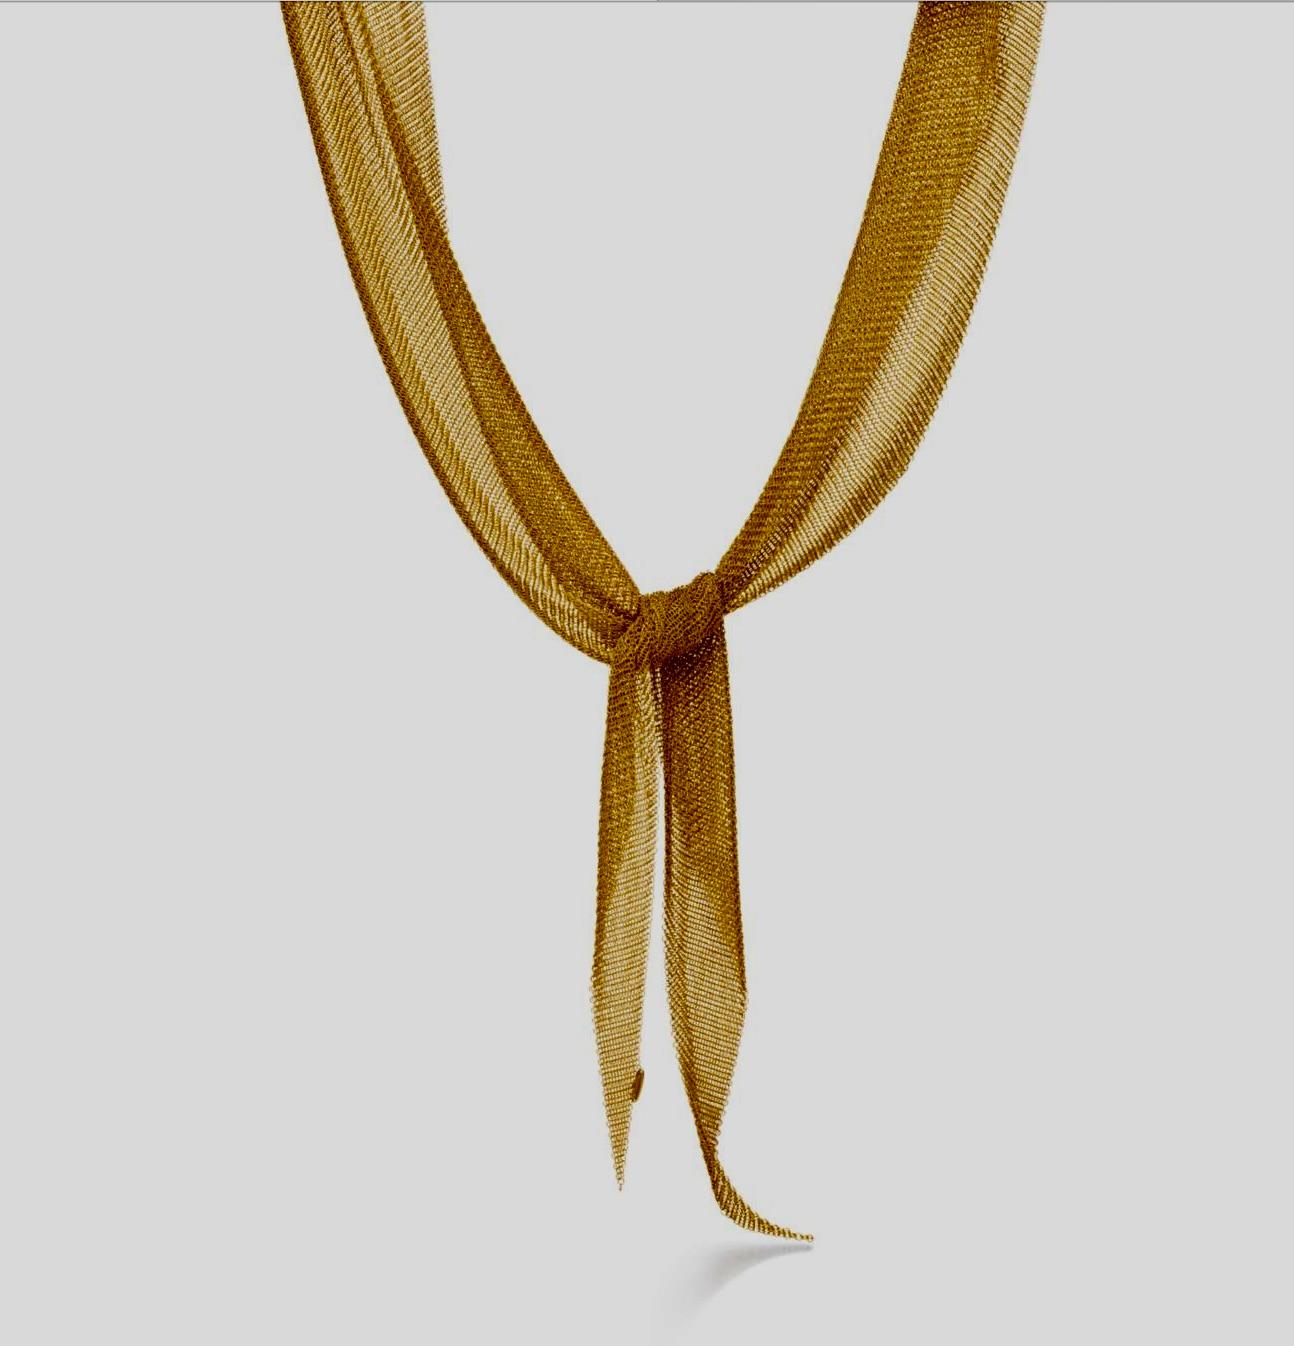 Sacarf Necklace from T&Co by Elsa Peretti
The form is malleable and ergonomic in the way it drapes over the body's contours. Scarf necklace in 18k gold. Size large, 42